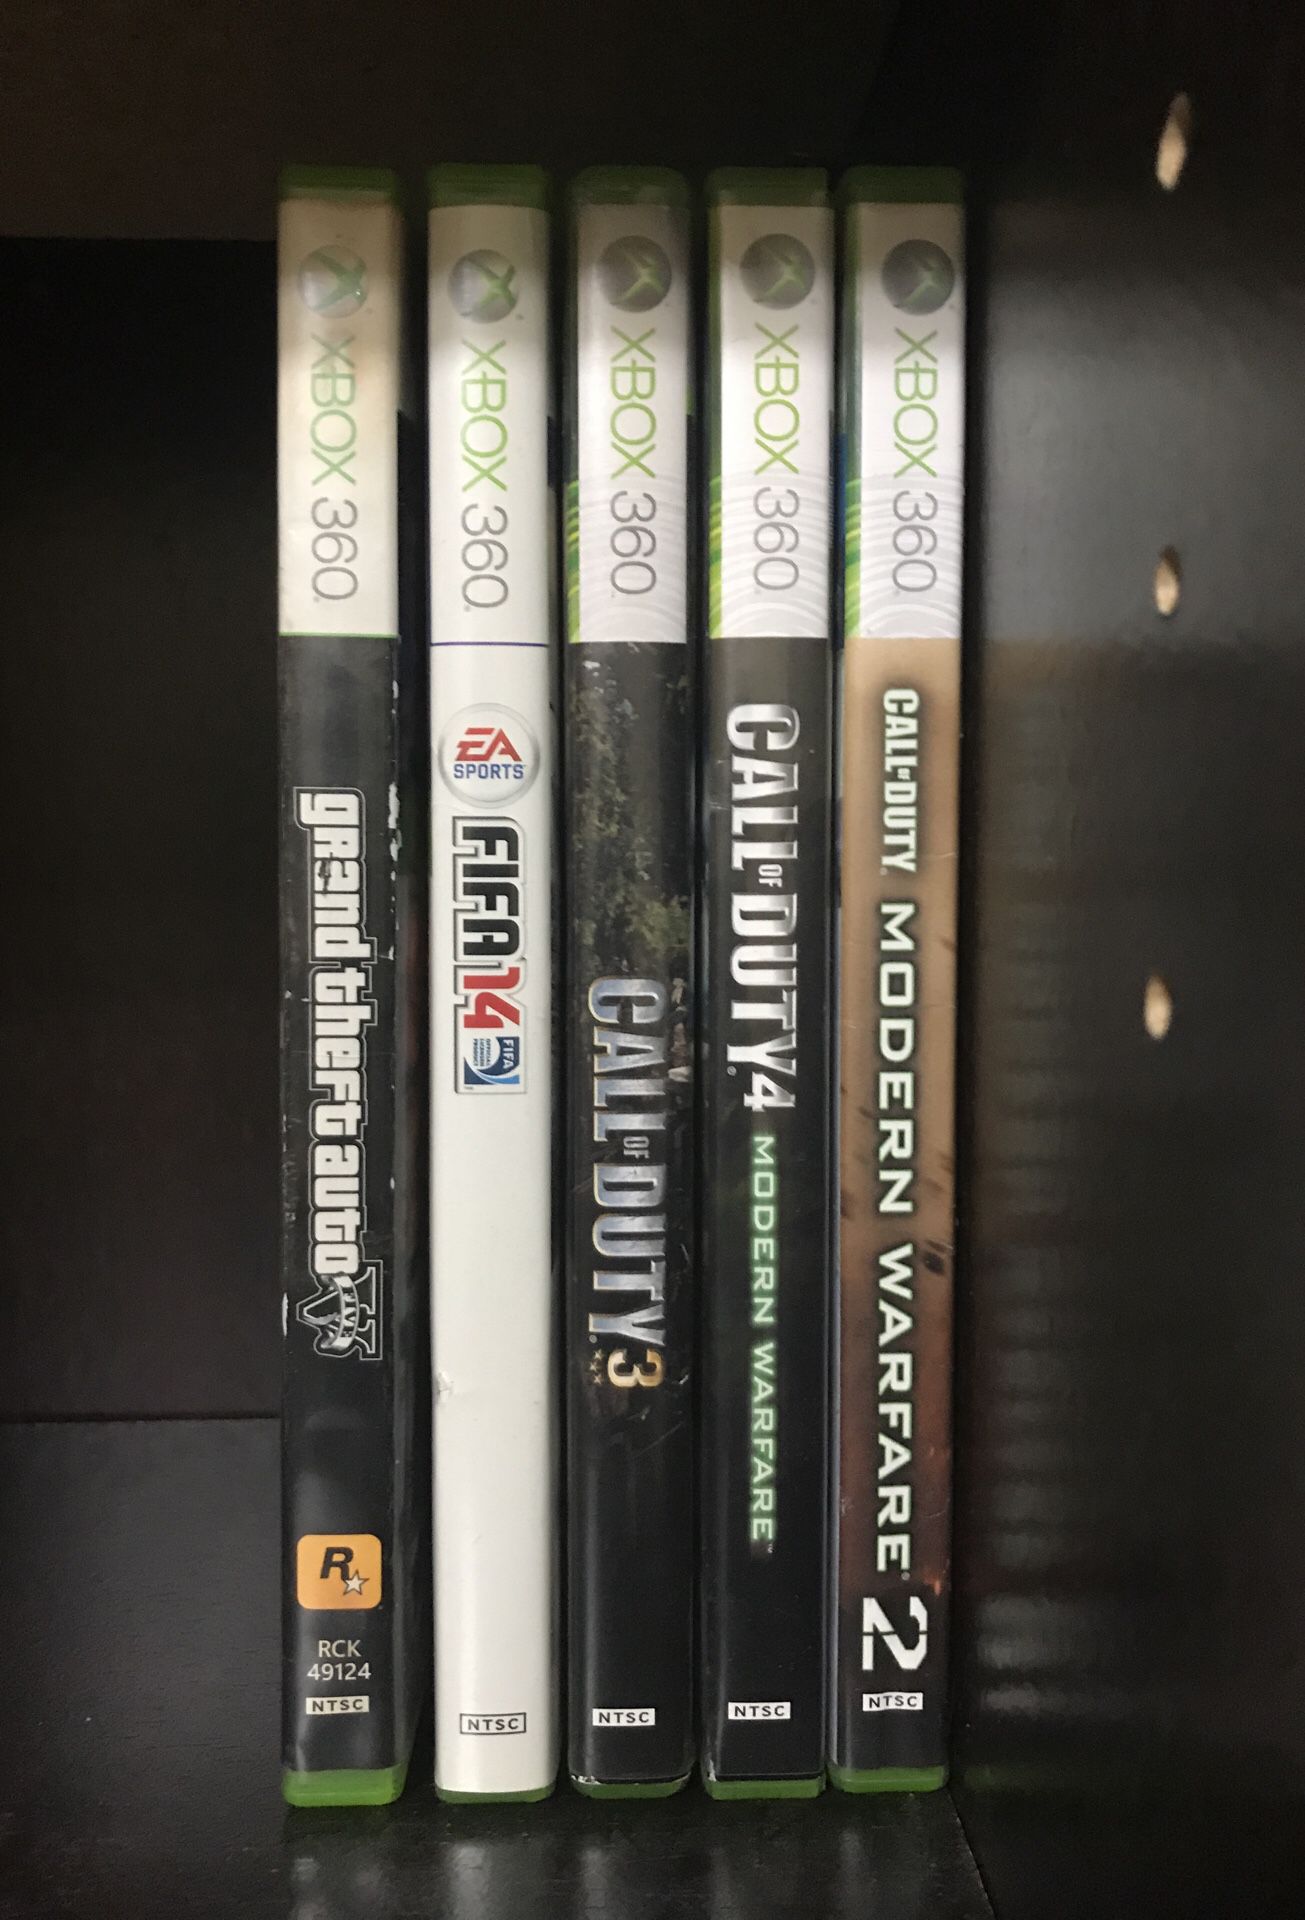 5 games for Xbox 360